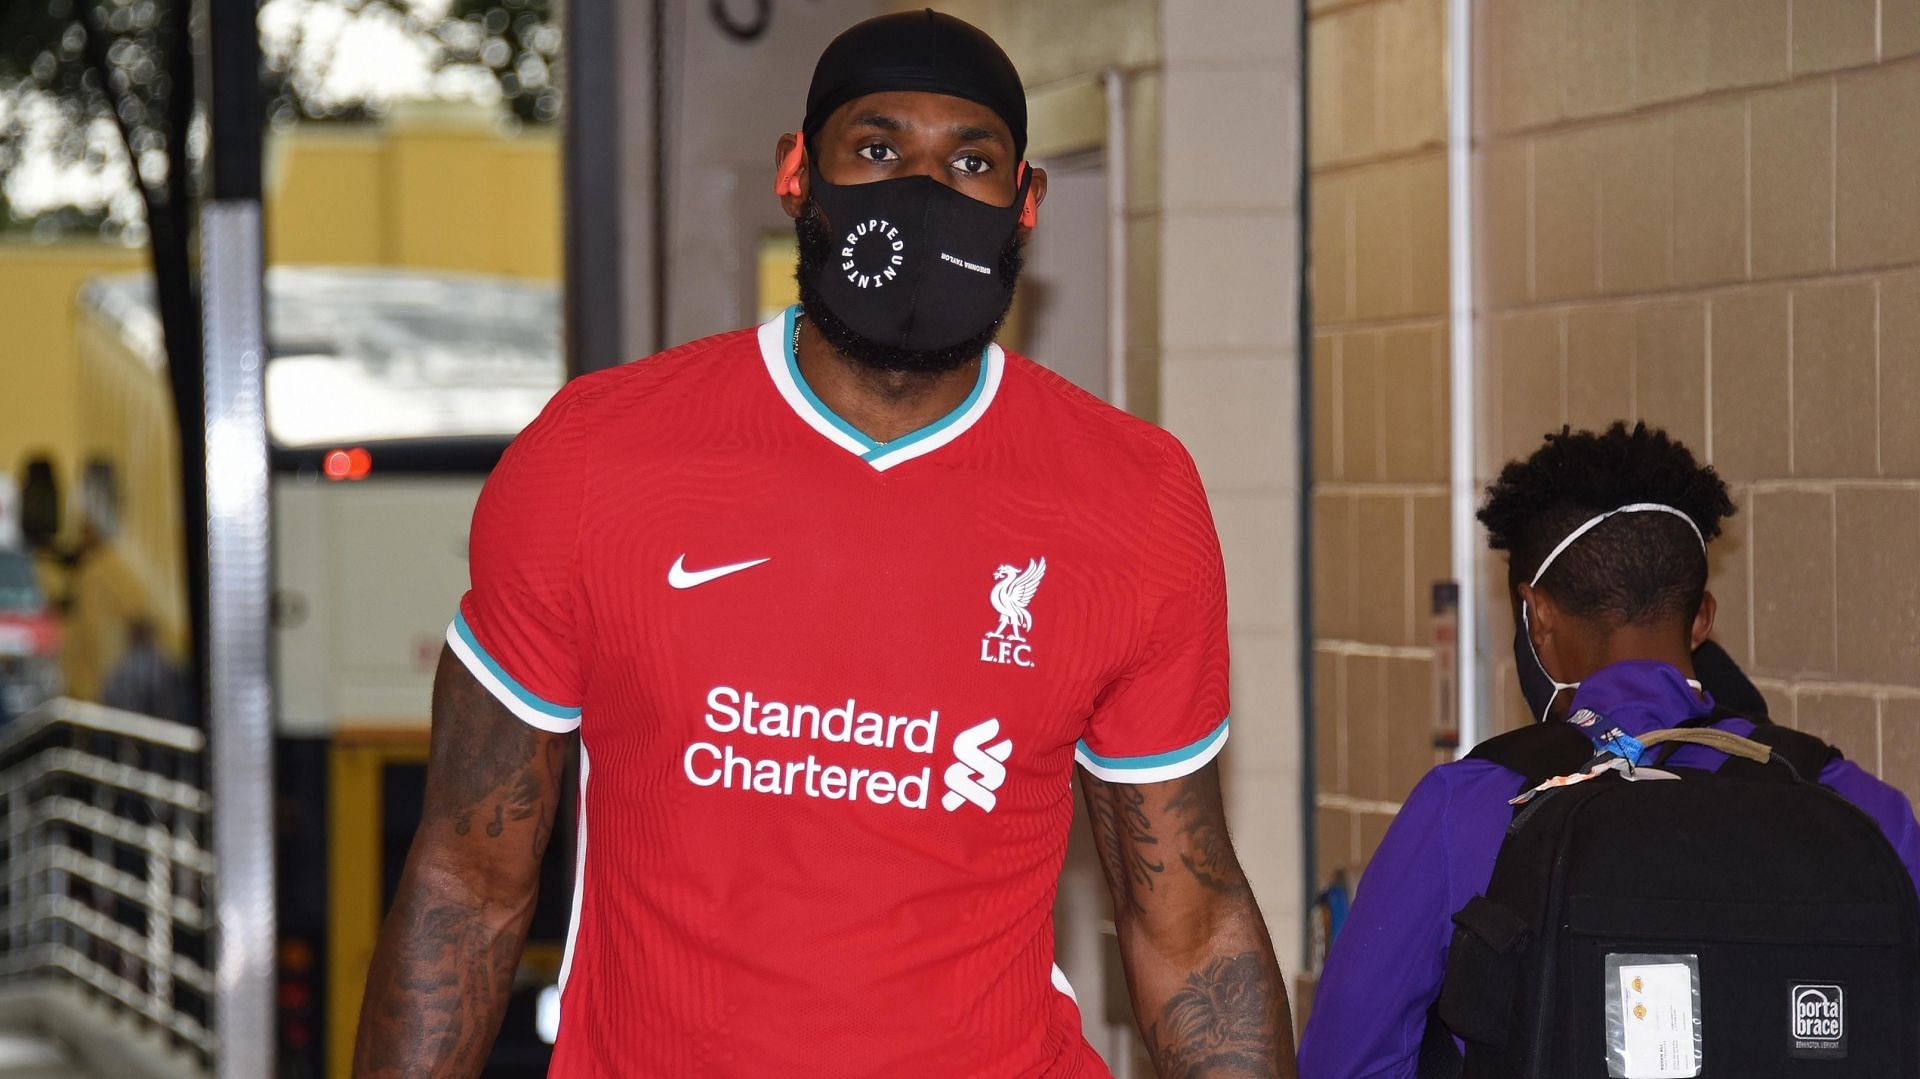 LeBron &quot;King&quot; James arrives for an LA Lakers game wearing the Liverpool FC home kit